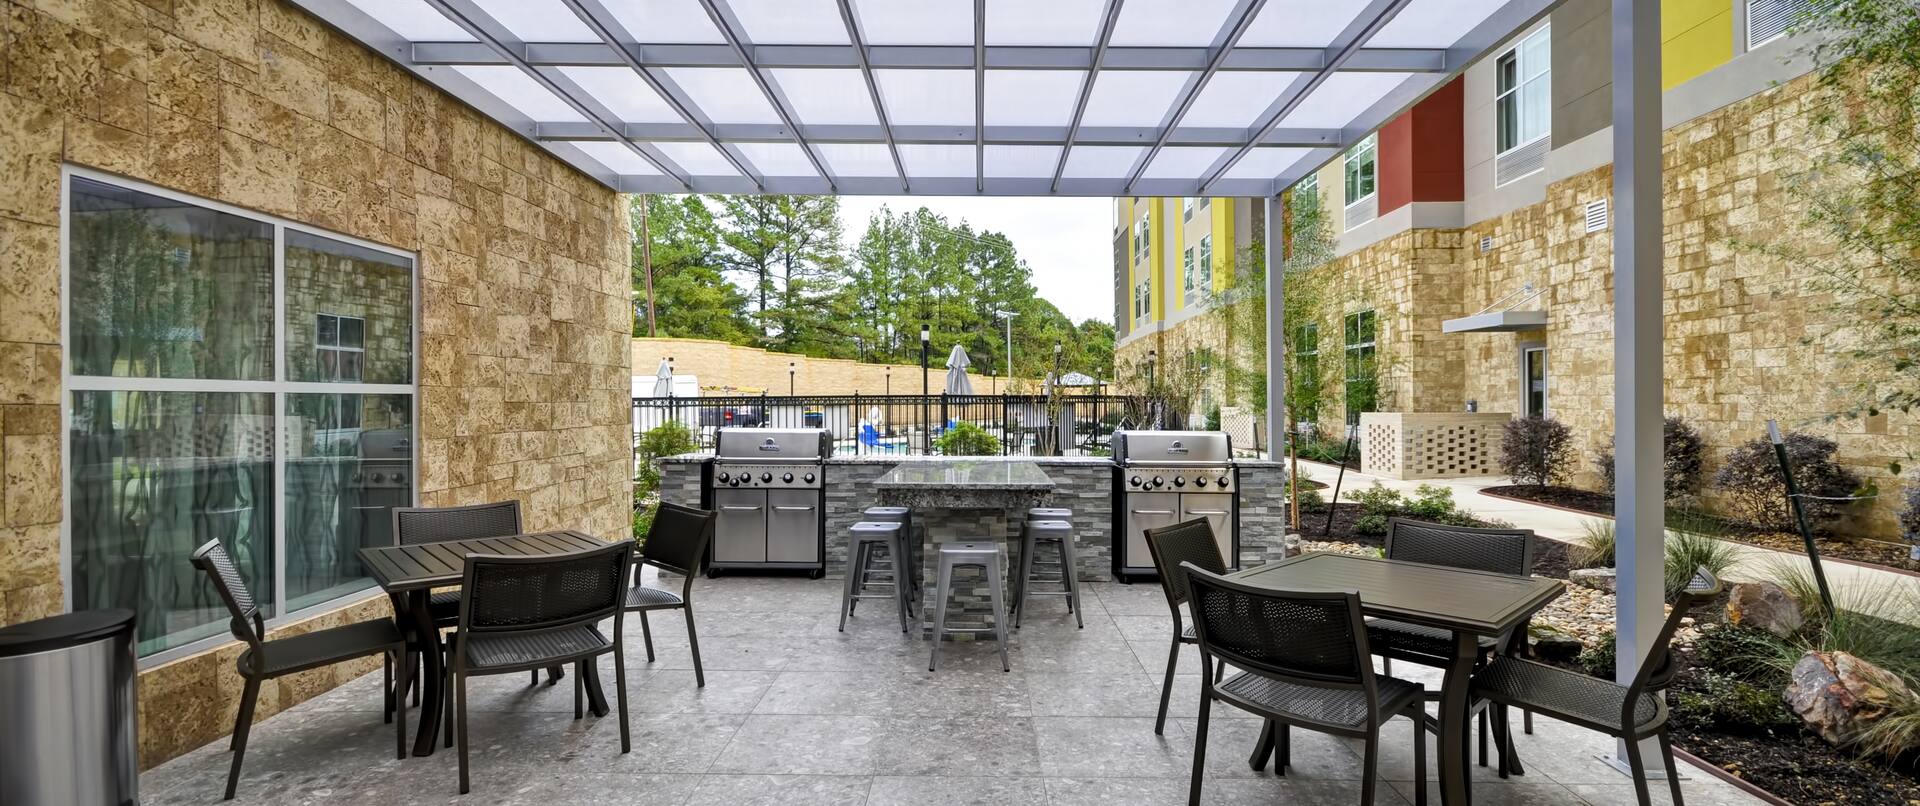 Tables and Chairs on Outdoor Patio with Two Grills